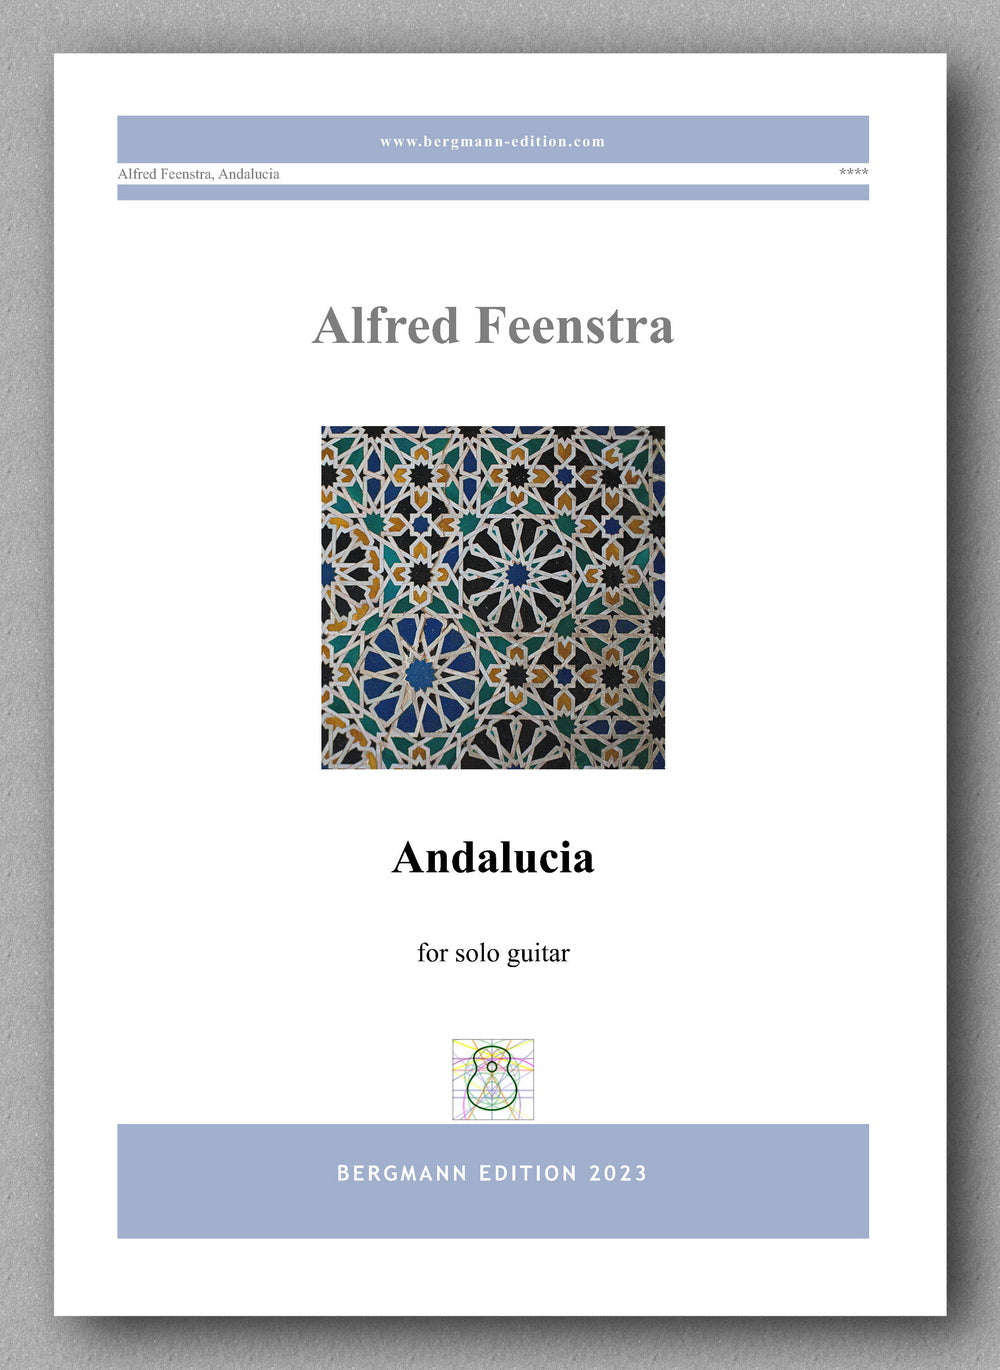 Alfred Feenstra, Andalucia - preview of the cover